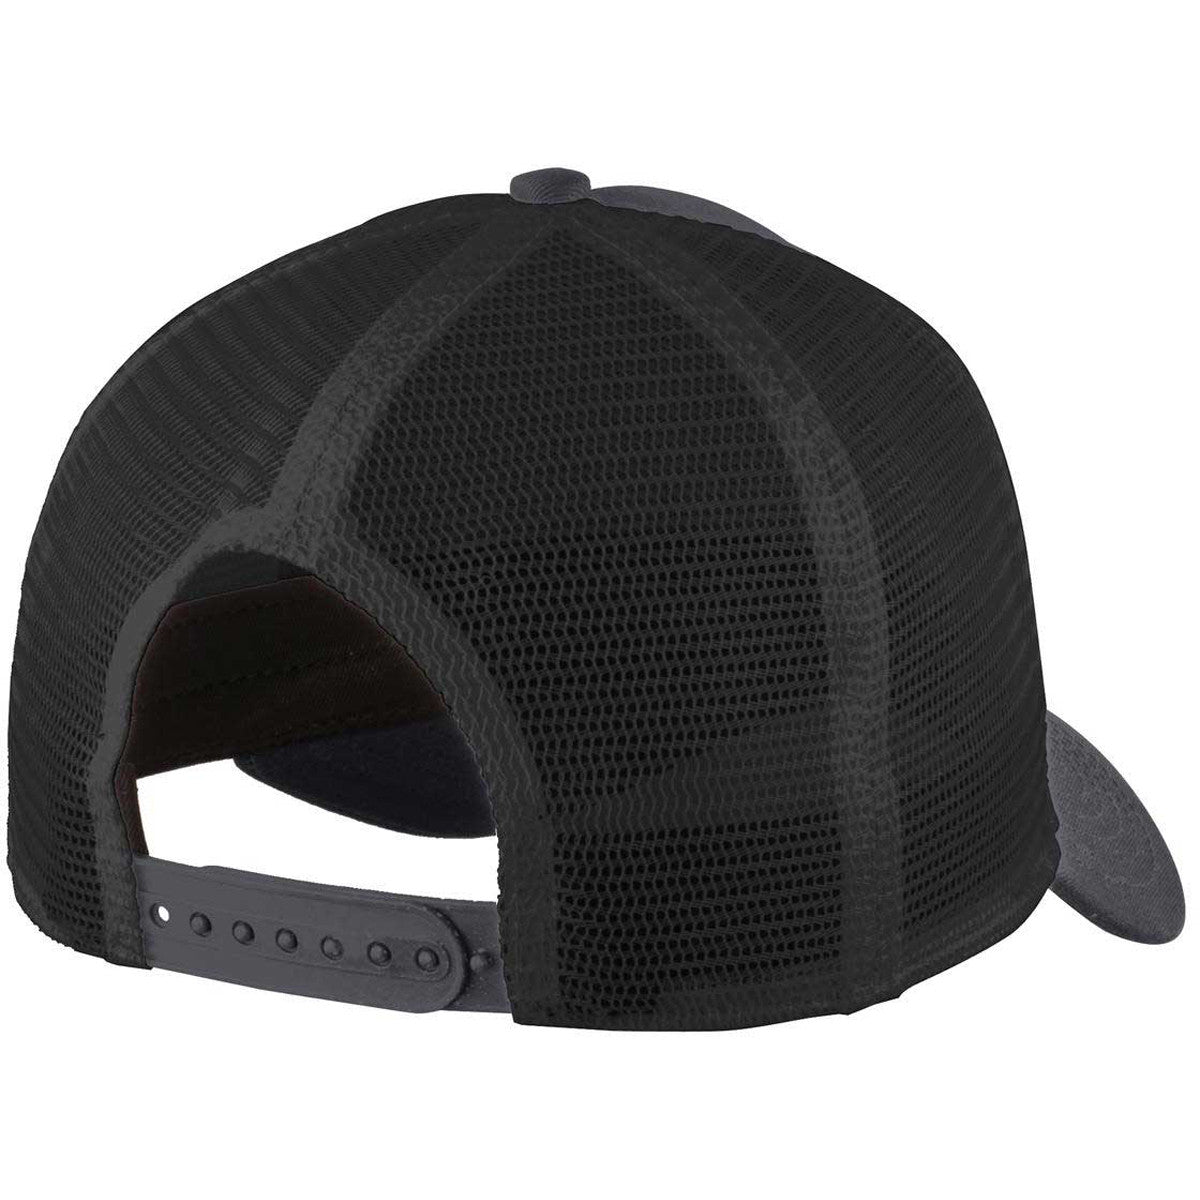 Authentic New Era 9FIFTY - Snapback Hat - Embroidered Master Logo Graphite / Black